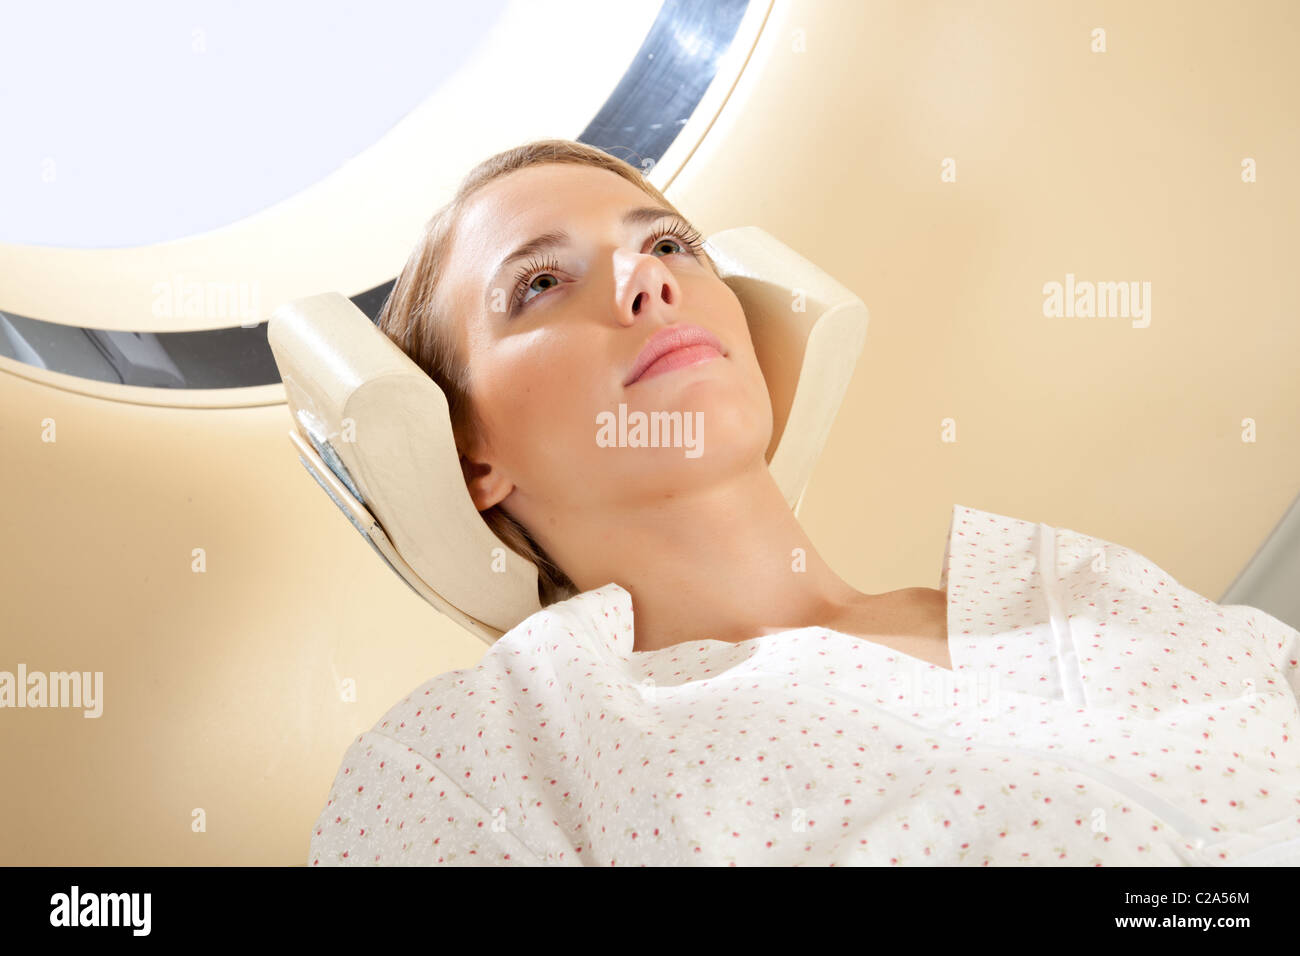 A young woman with eyes open preparing for a CT scan Stock Photo